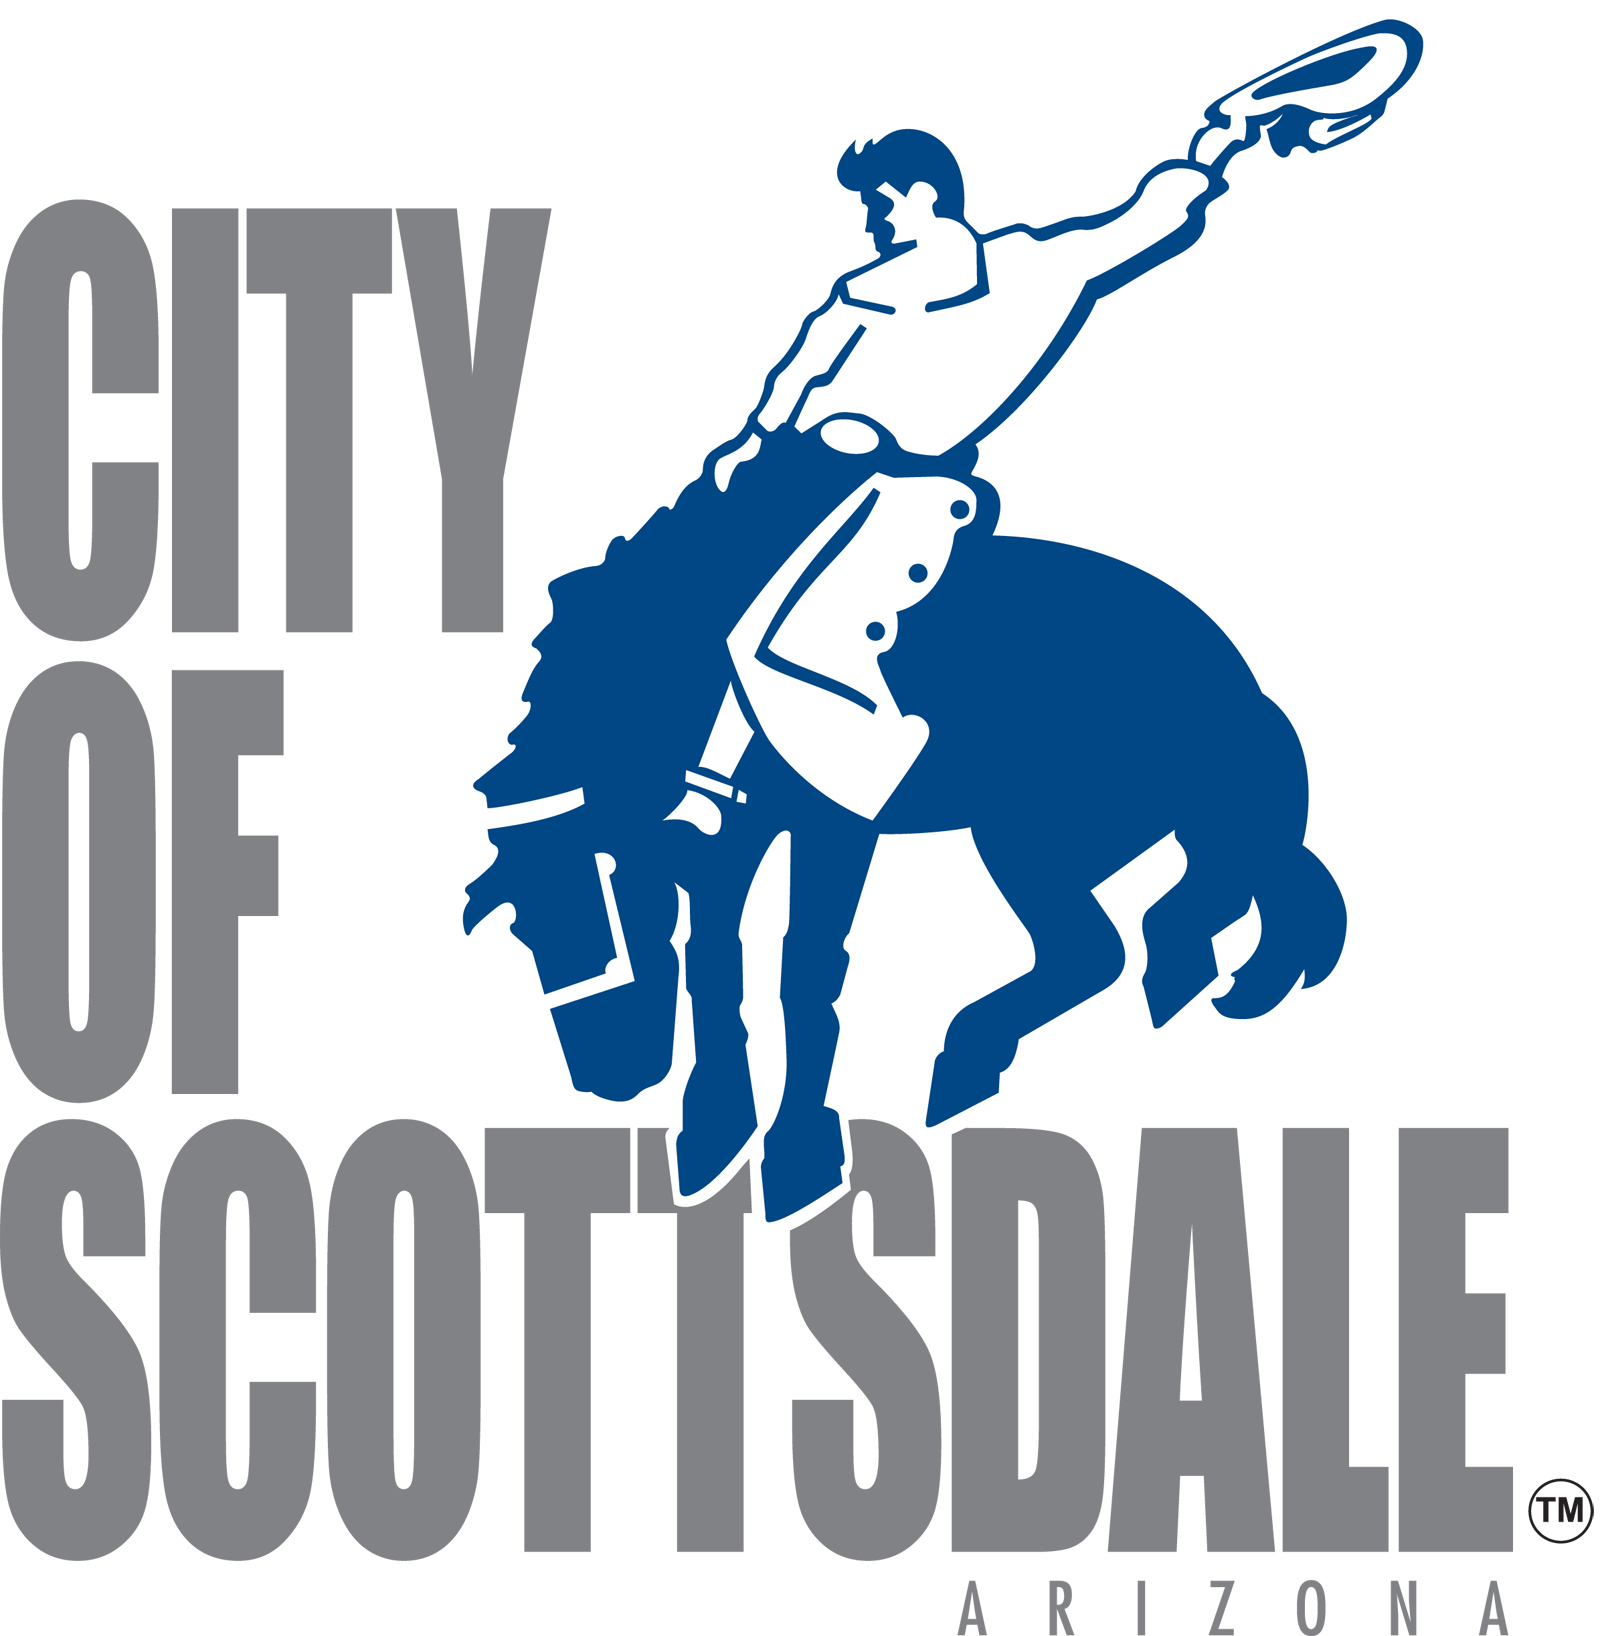 city-of-scottsdale-logo-with-horse-and-rider-scottsdale-ranch